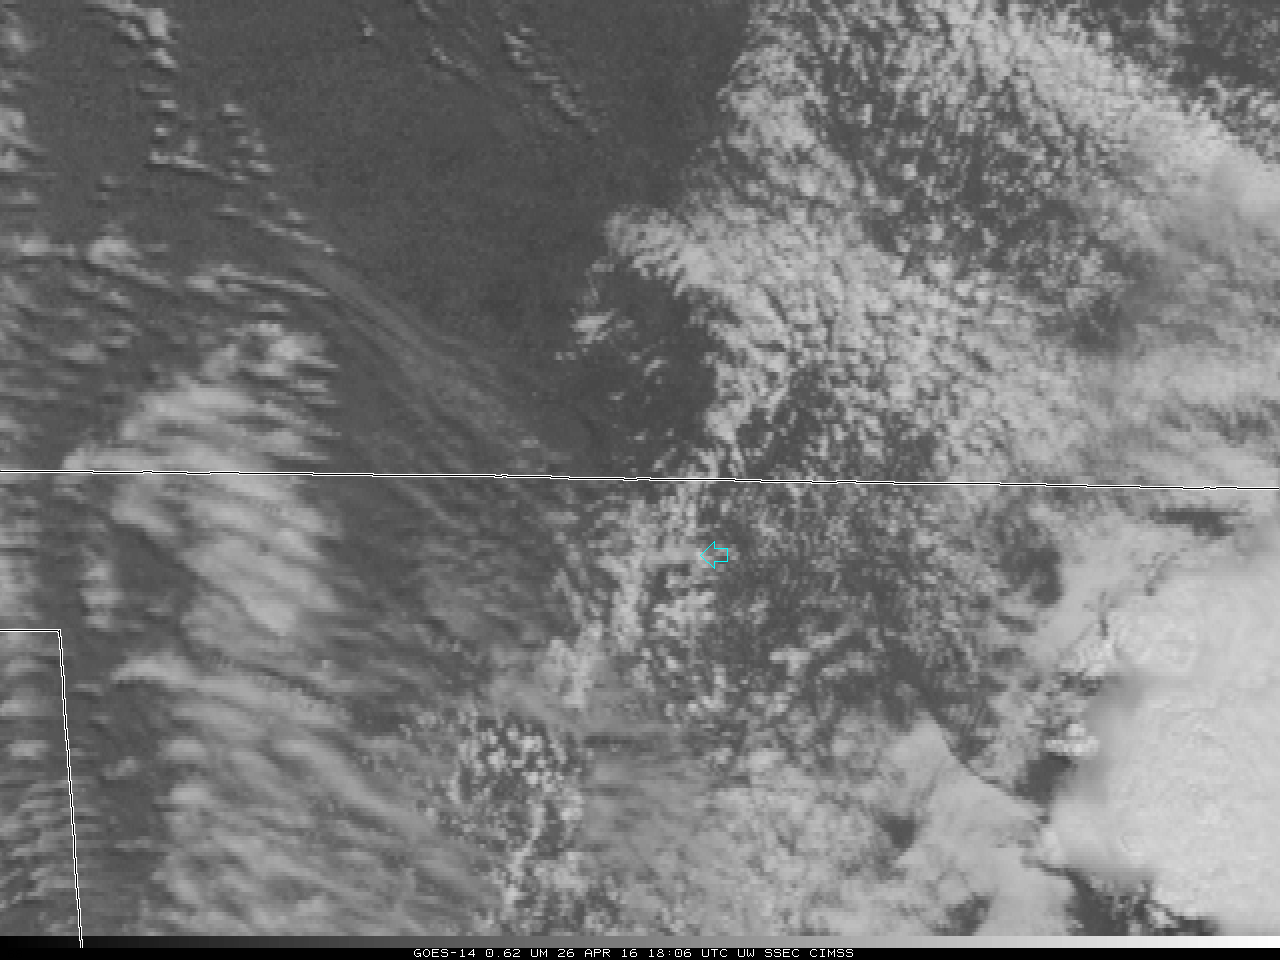 GOES-14 Visible (0.63 µm) Imagery, 26 April 2016. The orphan anvil is indicated by the Cyan Arrows through the animation (click to play animation)